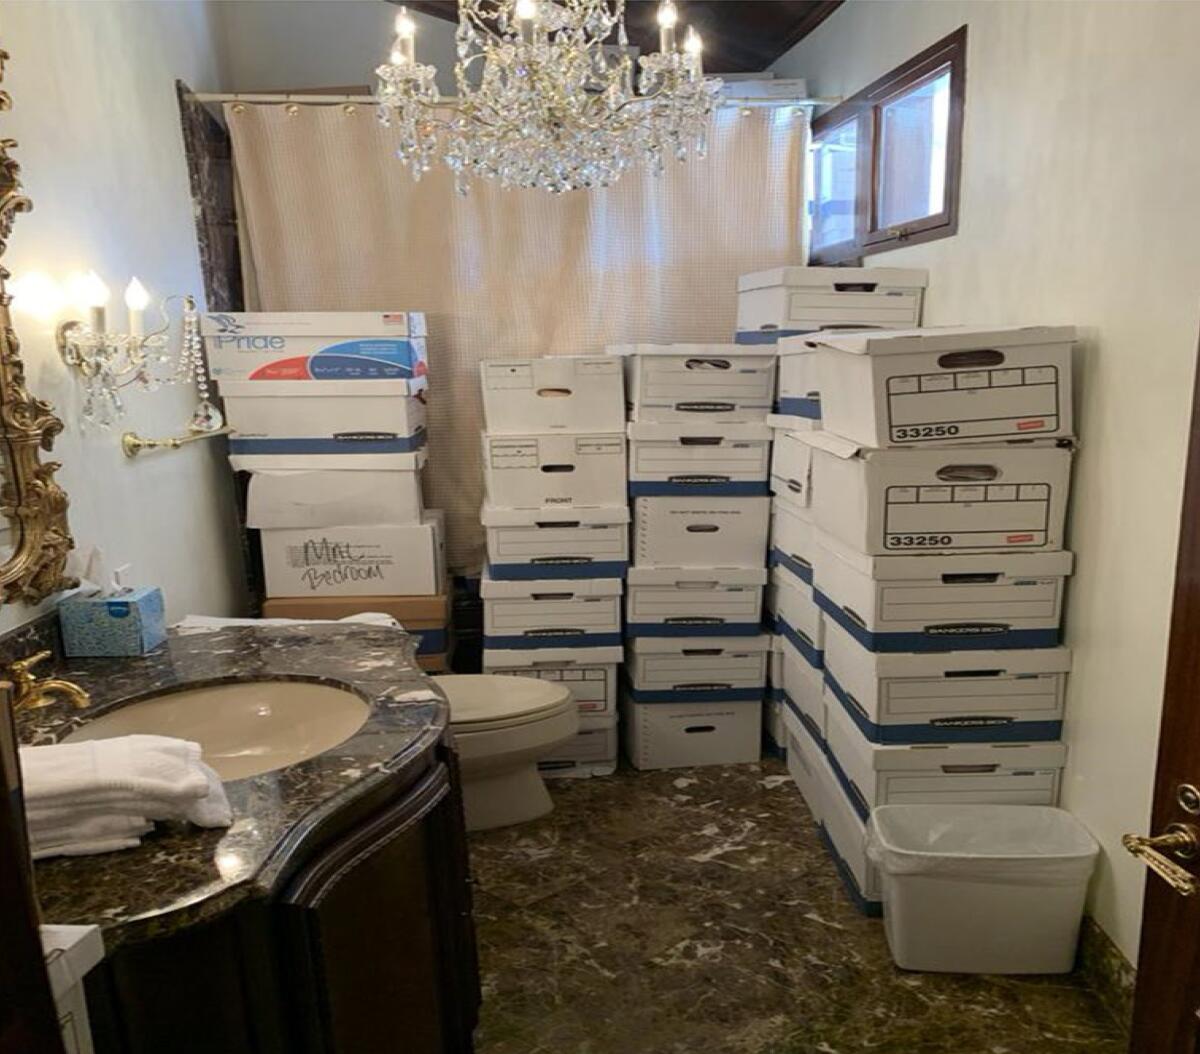 This image from the indictment against former President Trump shows boxes of records stored in a bathroom at Mar-a-Lago.